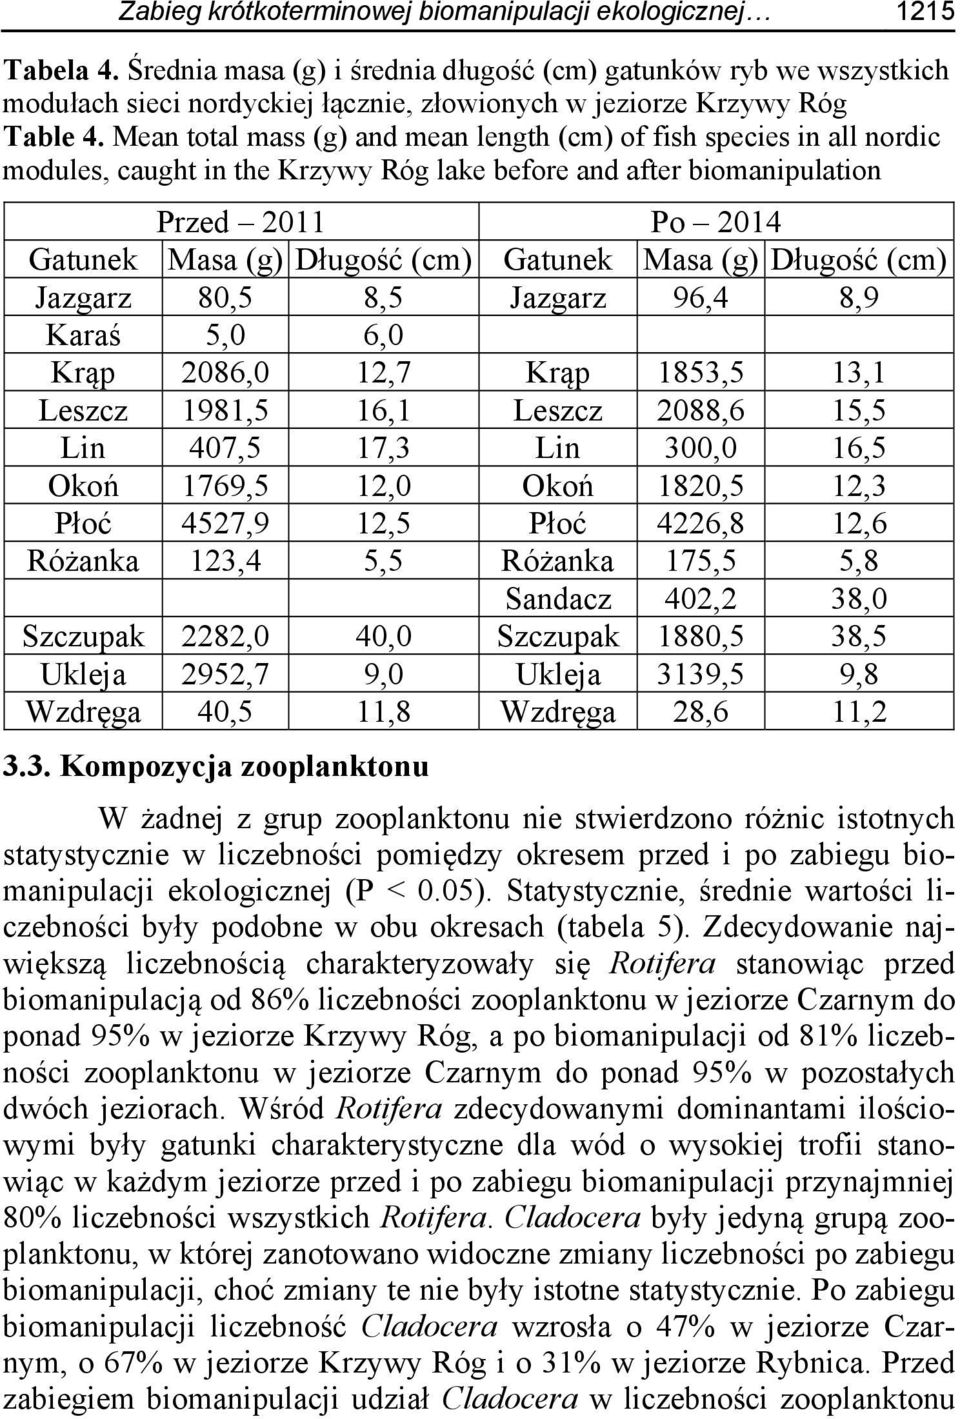 Mean total mass (g) and mean length (cm) of fish species in all nordic modules, caught in the Krzywy Róg lake before and after biomanipulation Przed 2011 Po 2014 Gatunek Masa (g) Długość (cm) Gatunek